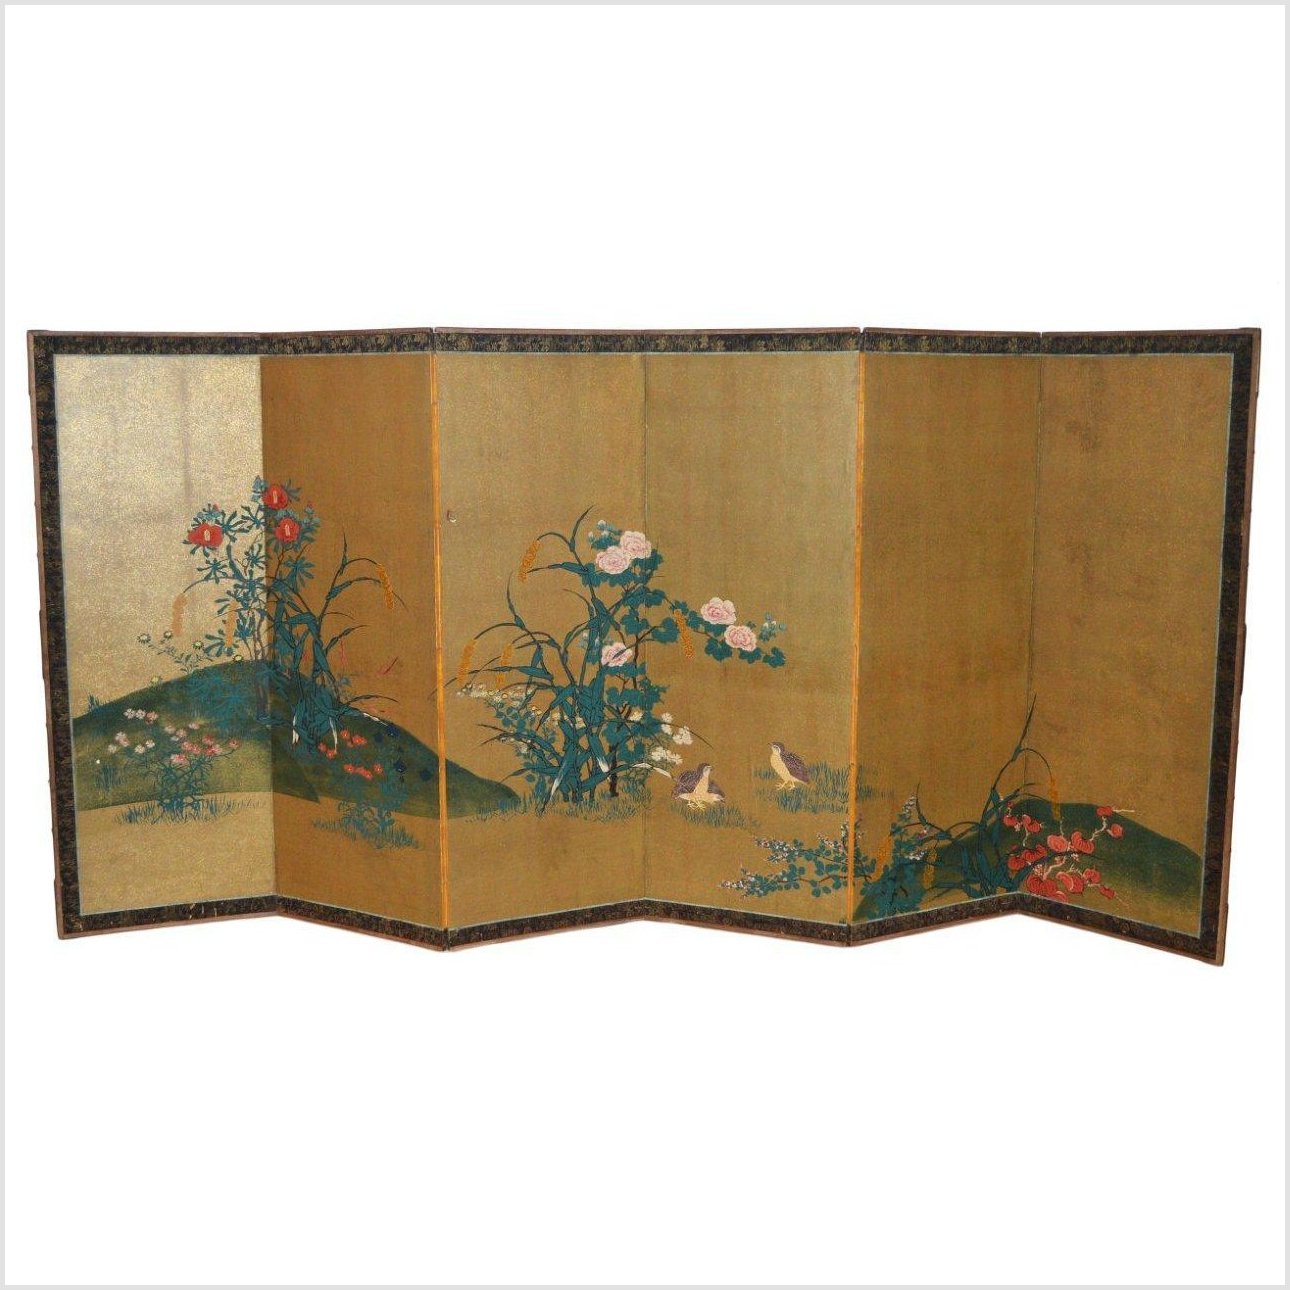 4-Panel Gold Screen with Chinoiseries of Flowers and Plants-YN2804-1. Asian & Chinese Furniture, Art, Antiques, Vintage Home Décor for sale at FEA Home